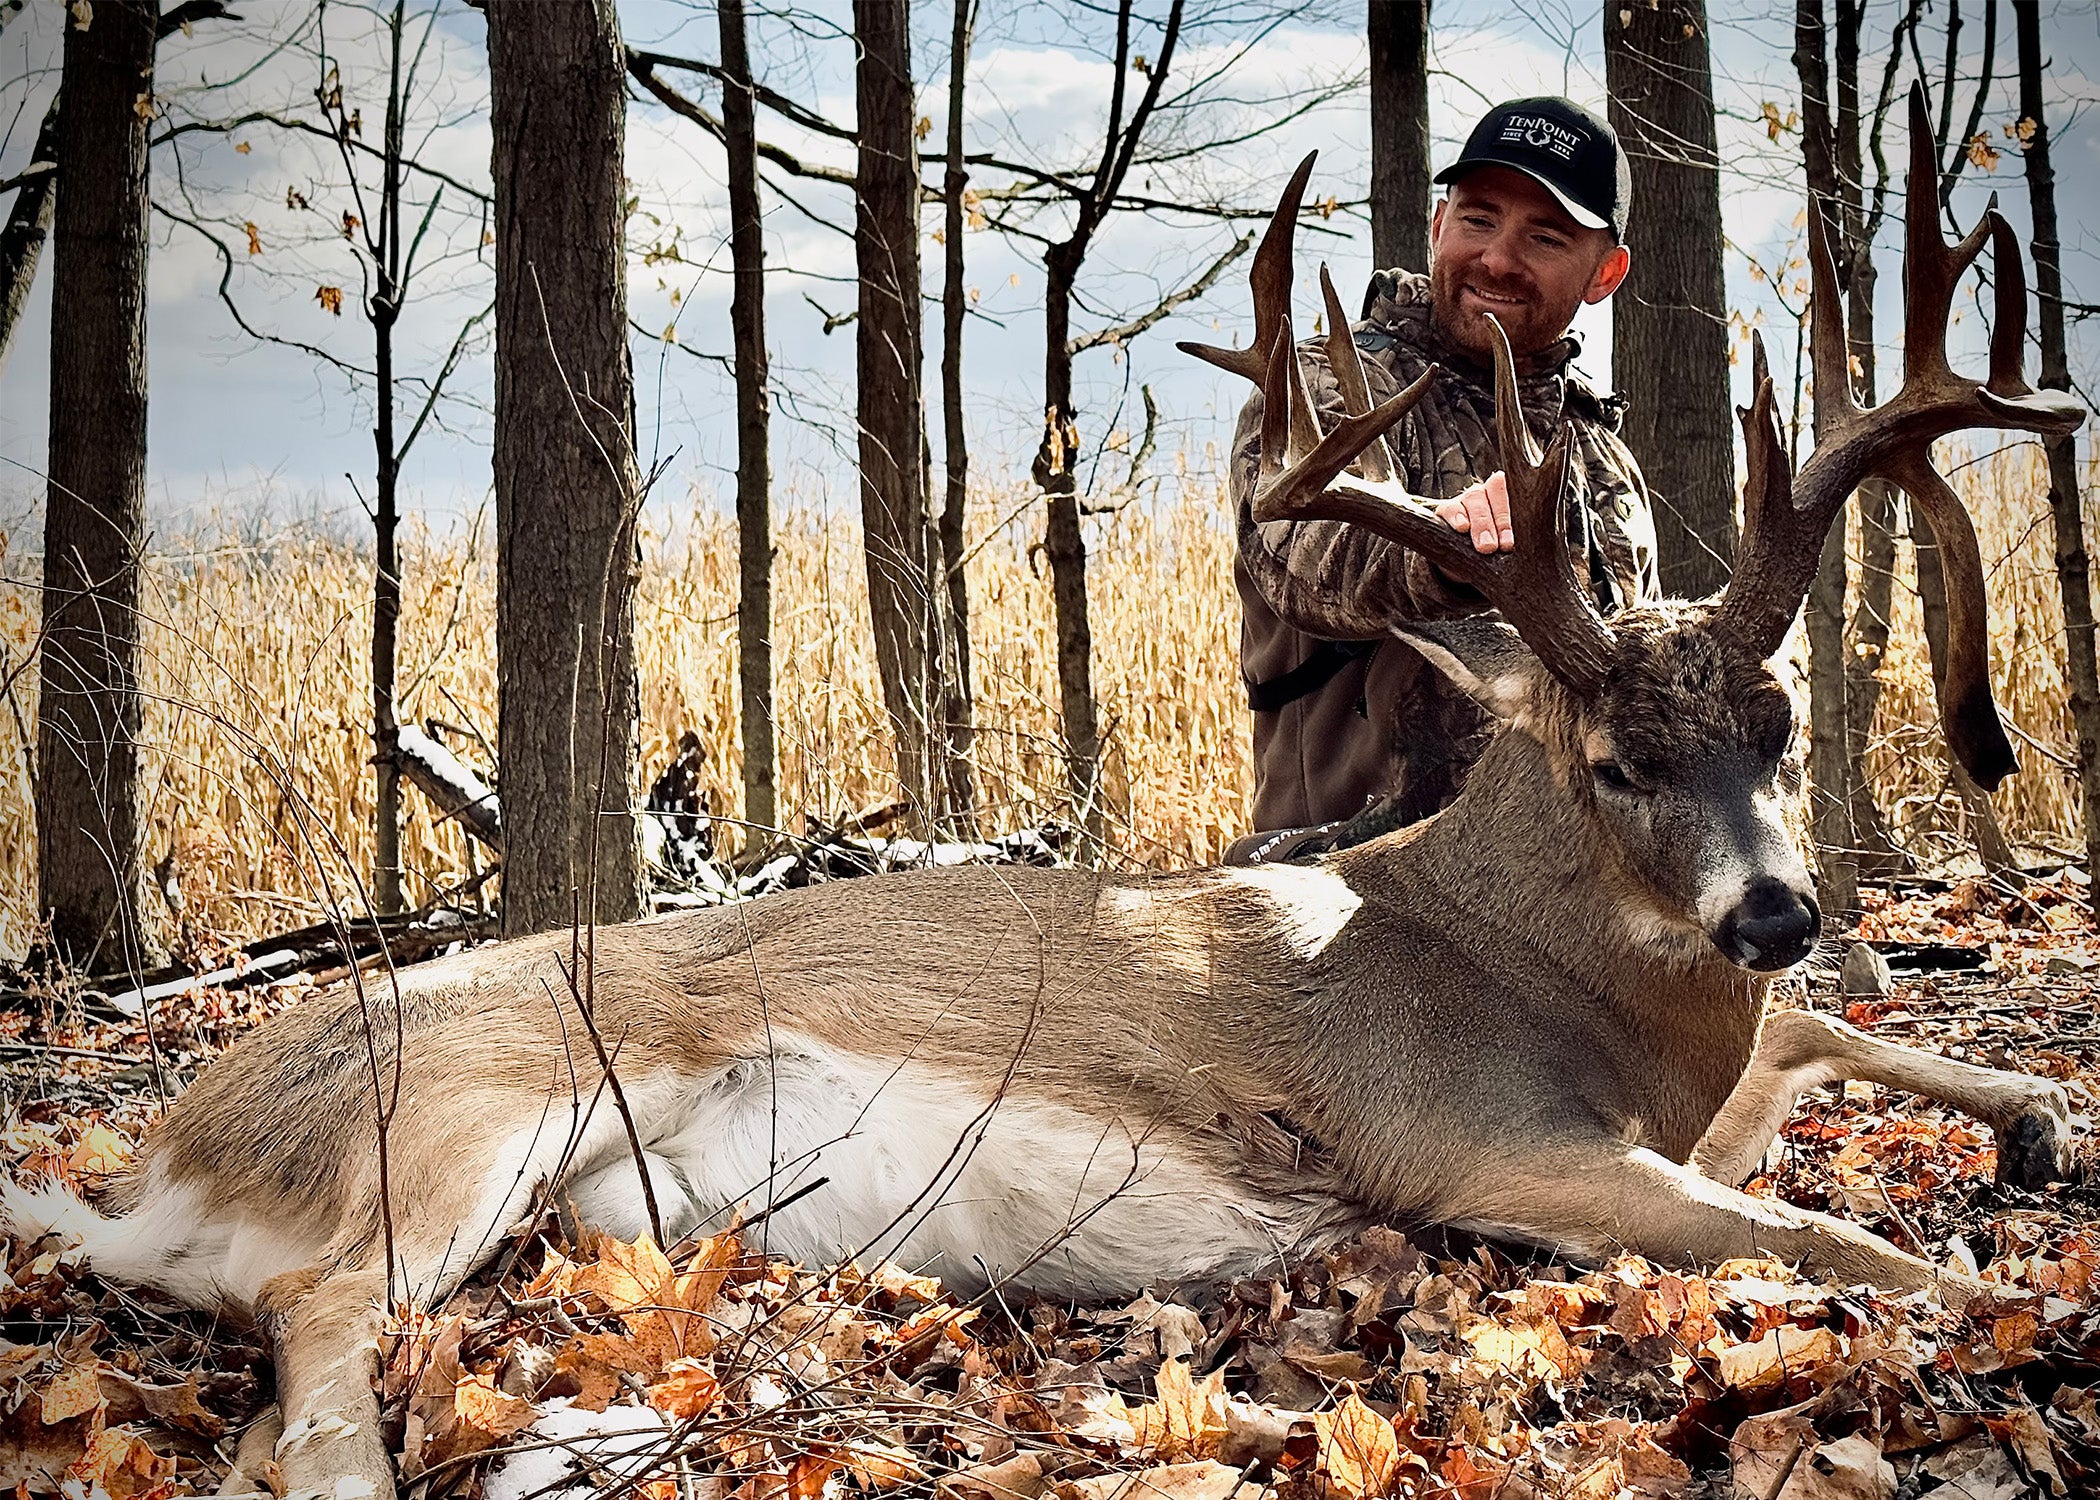 Ohio Hunter Tags 232-Inch Monster Whitetail with 12-Inch Drop Tine